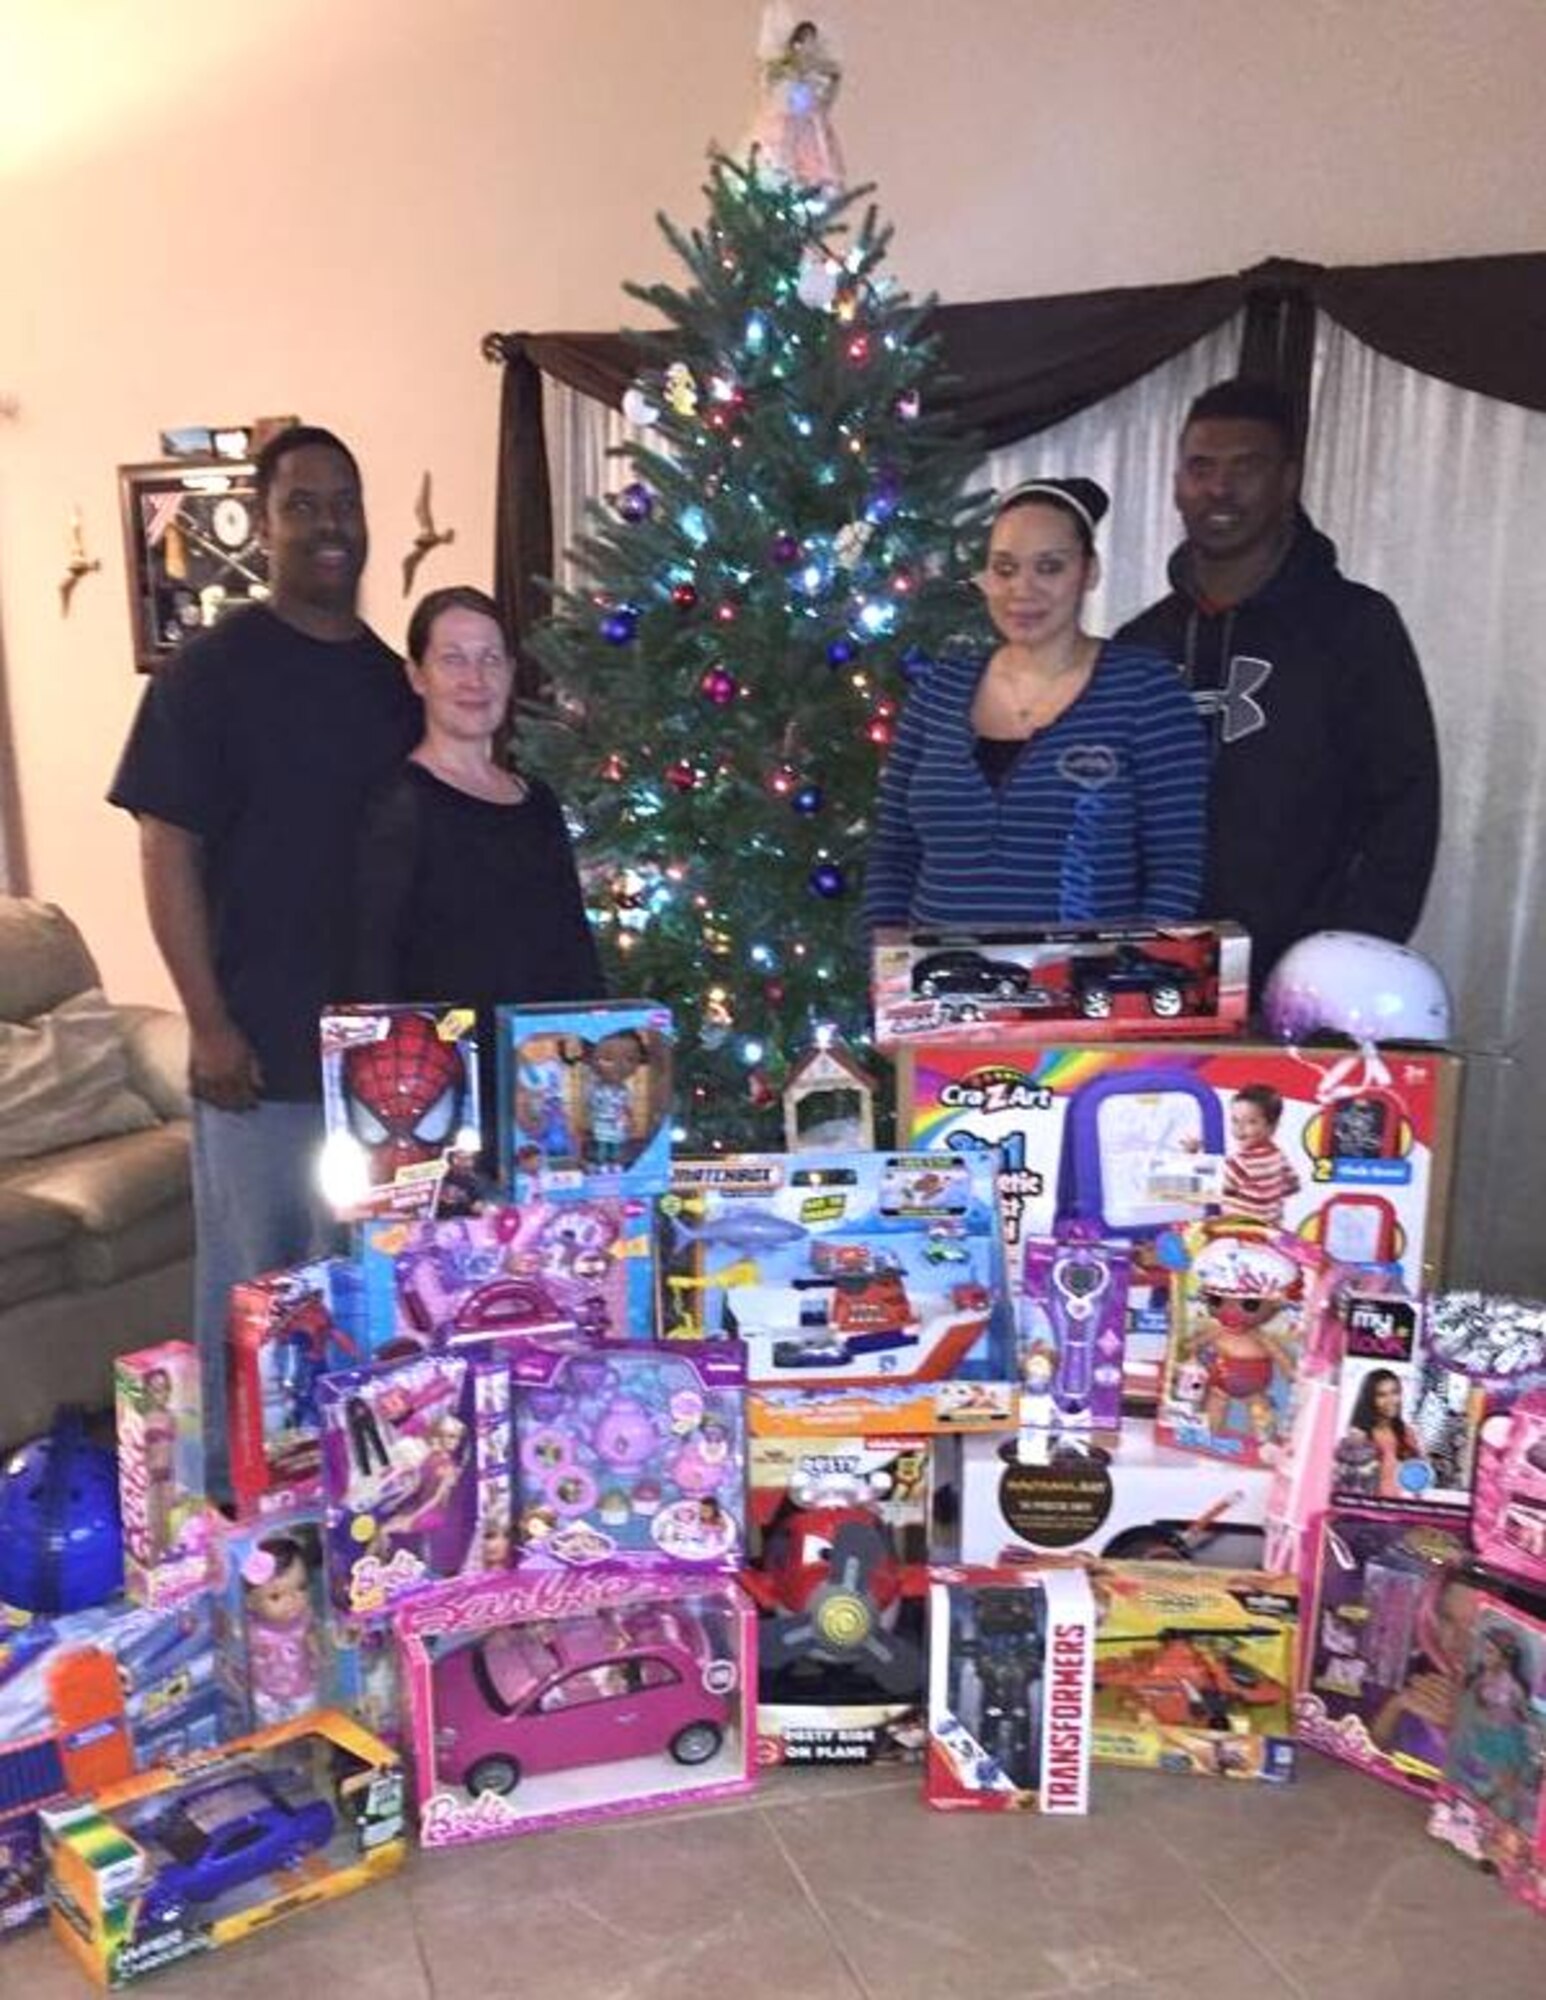 Master Sgt. Dontrel Daniels, 325th Aircraft Maintenance Squadron production superintendent, and wife Christina Daniels (left), and Staff Sgt. Gary Stewart, 95th Aircraft Maintenance Unit weapons load crew chief, and wife Michelle Stewart (right), stand by gifts donated to a family that needed some holiday cheer. The 325th AMXS holiday committee had funds left over and decided to donate what was left to a family. (U.S. Air Force courtesy photo)